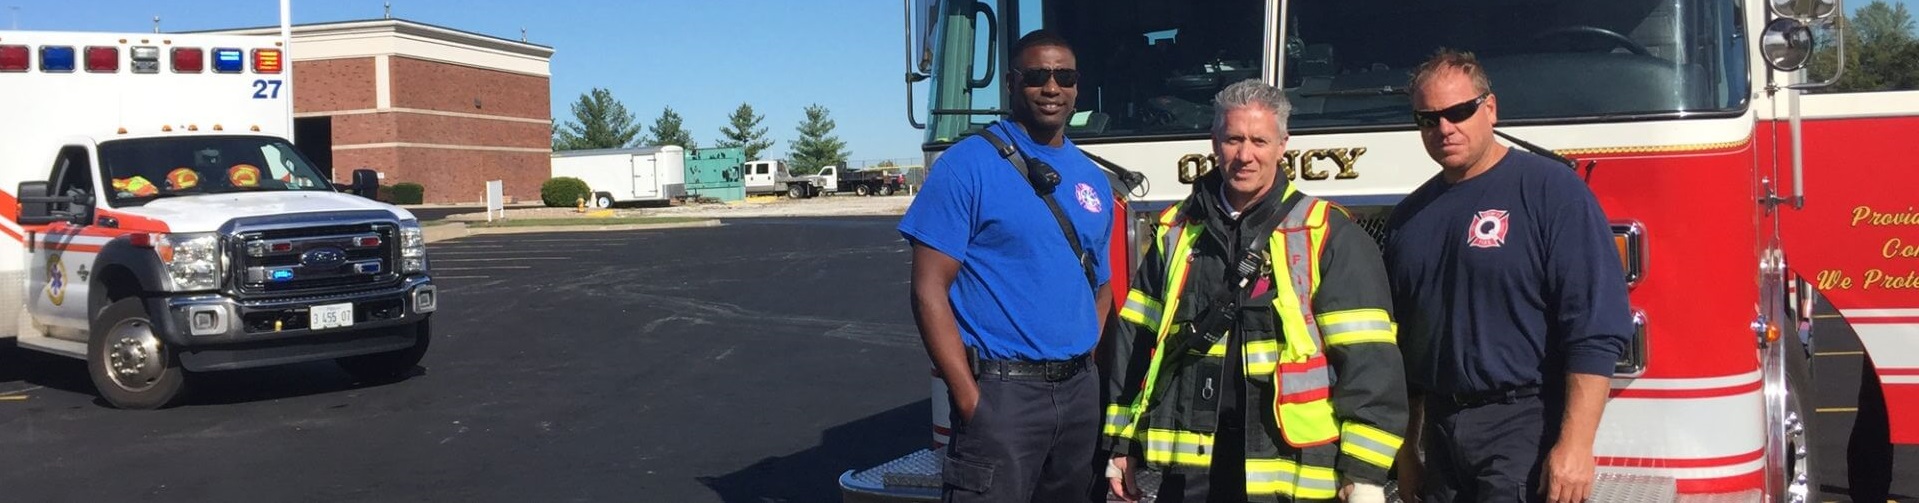 A police officer, firefighter, and medic pose in front of emergency vehicles